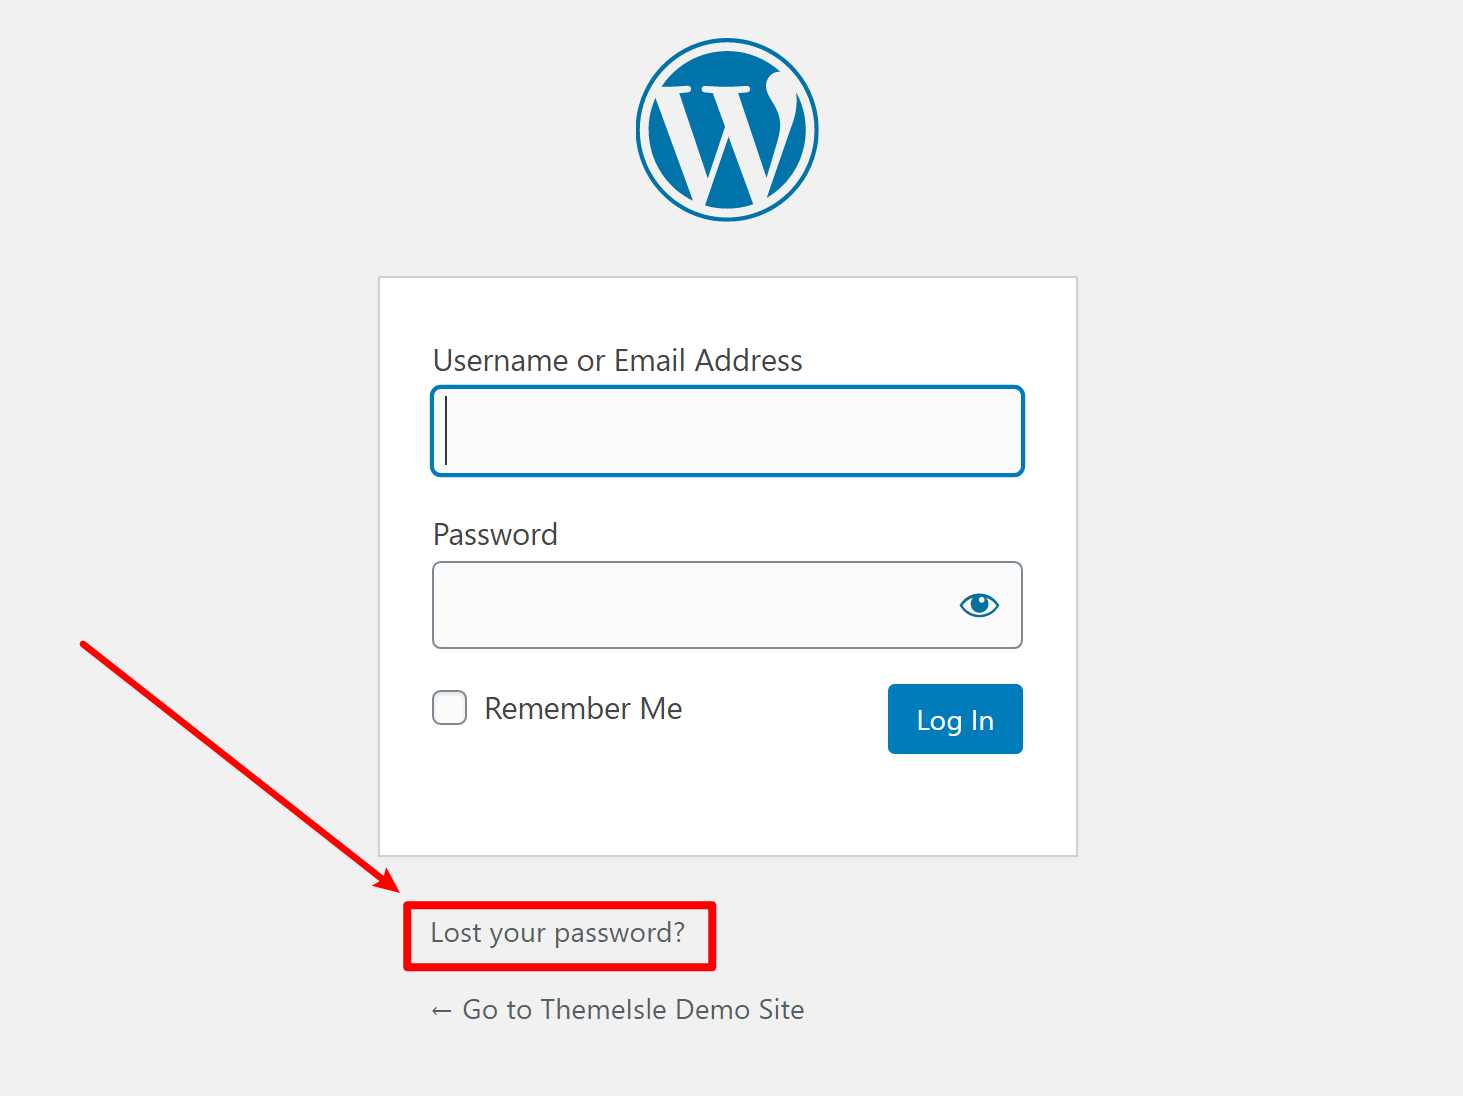 How to use the WordPress password reset feature to change password